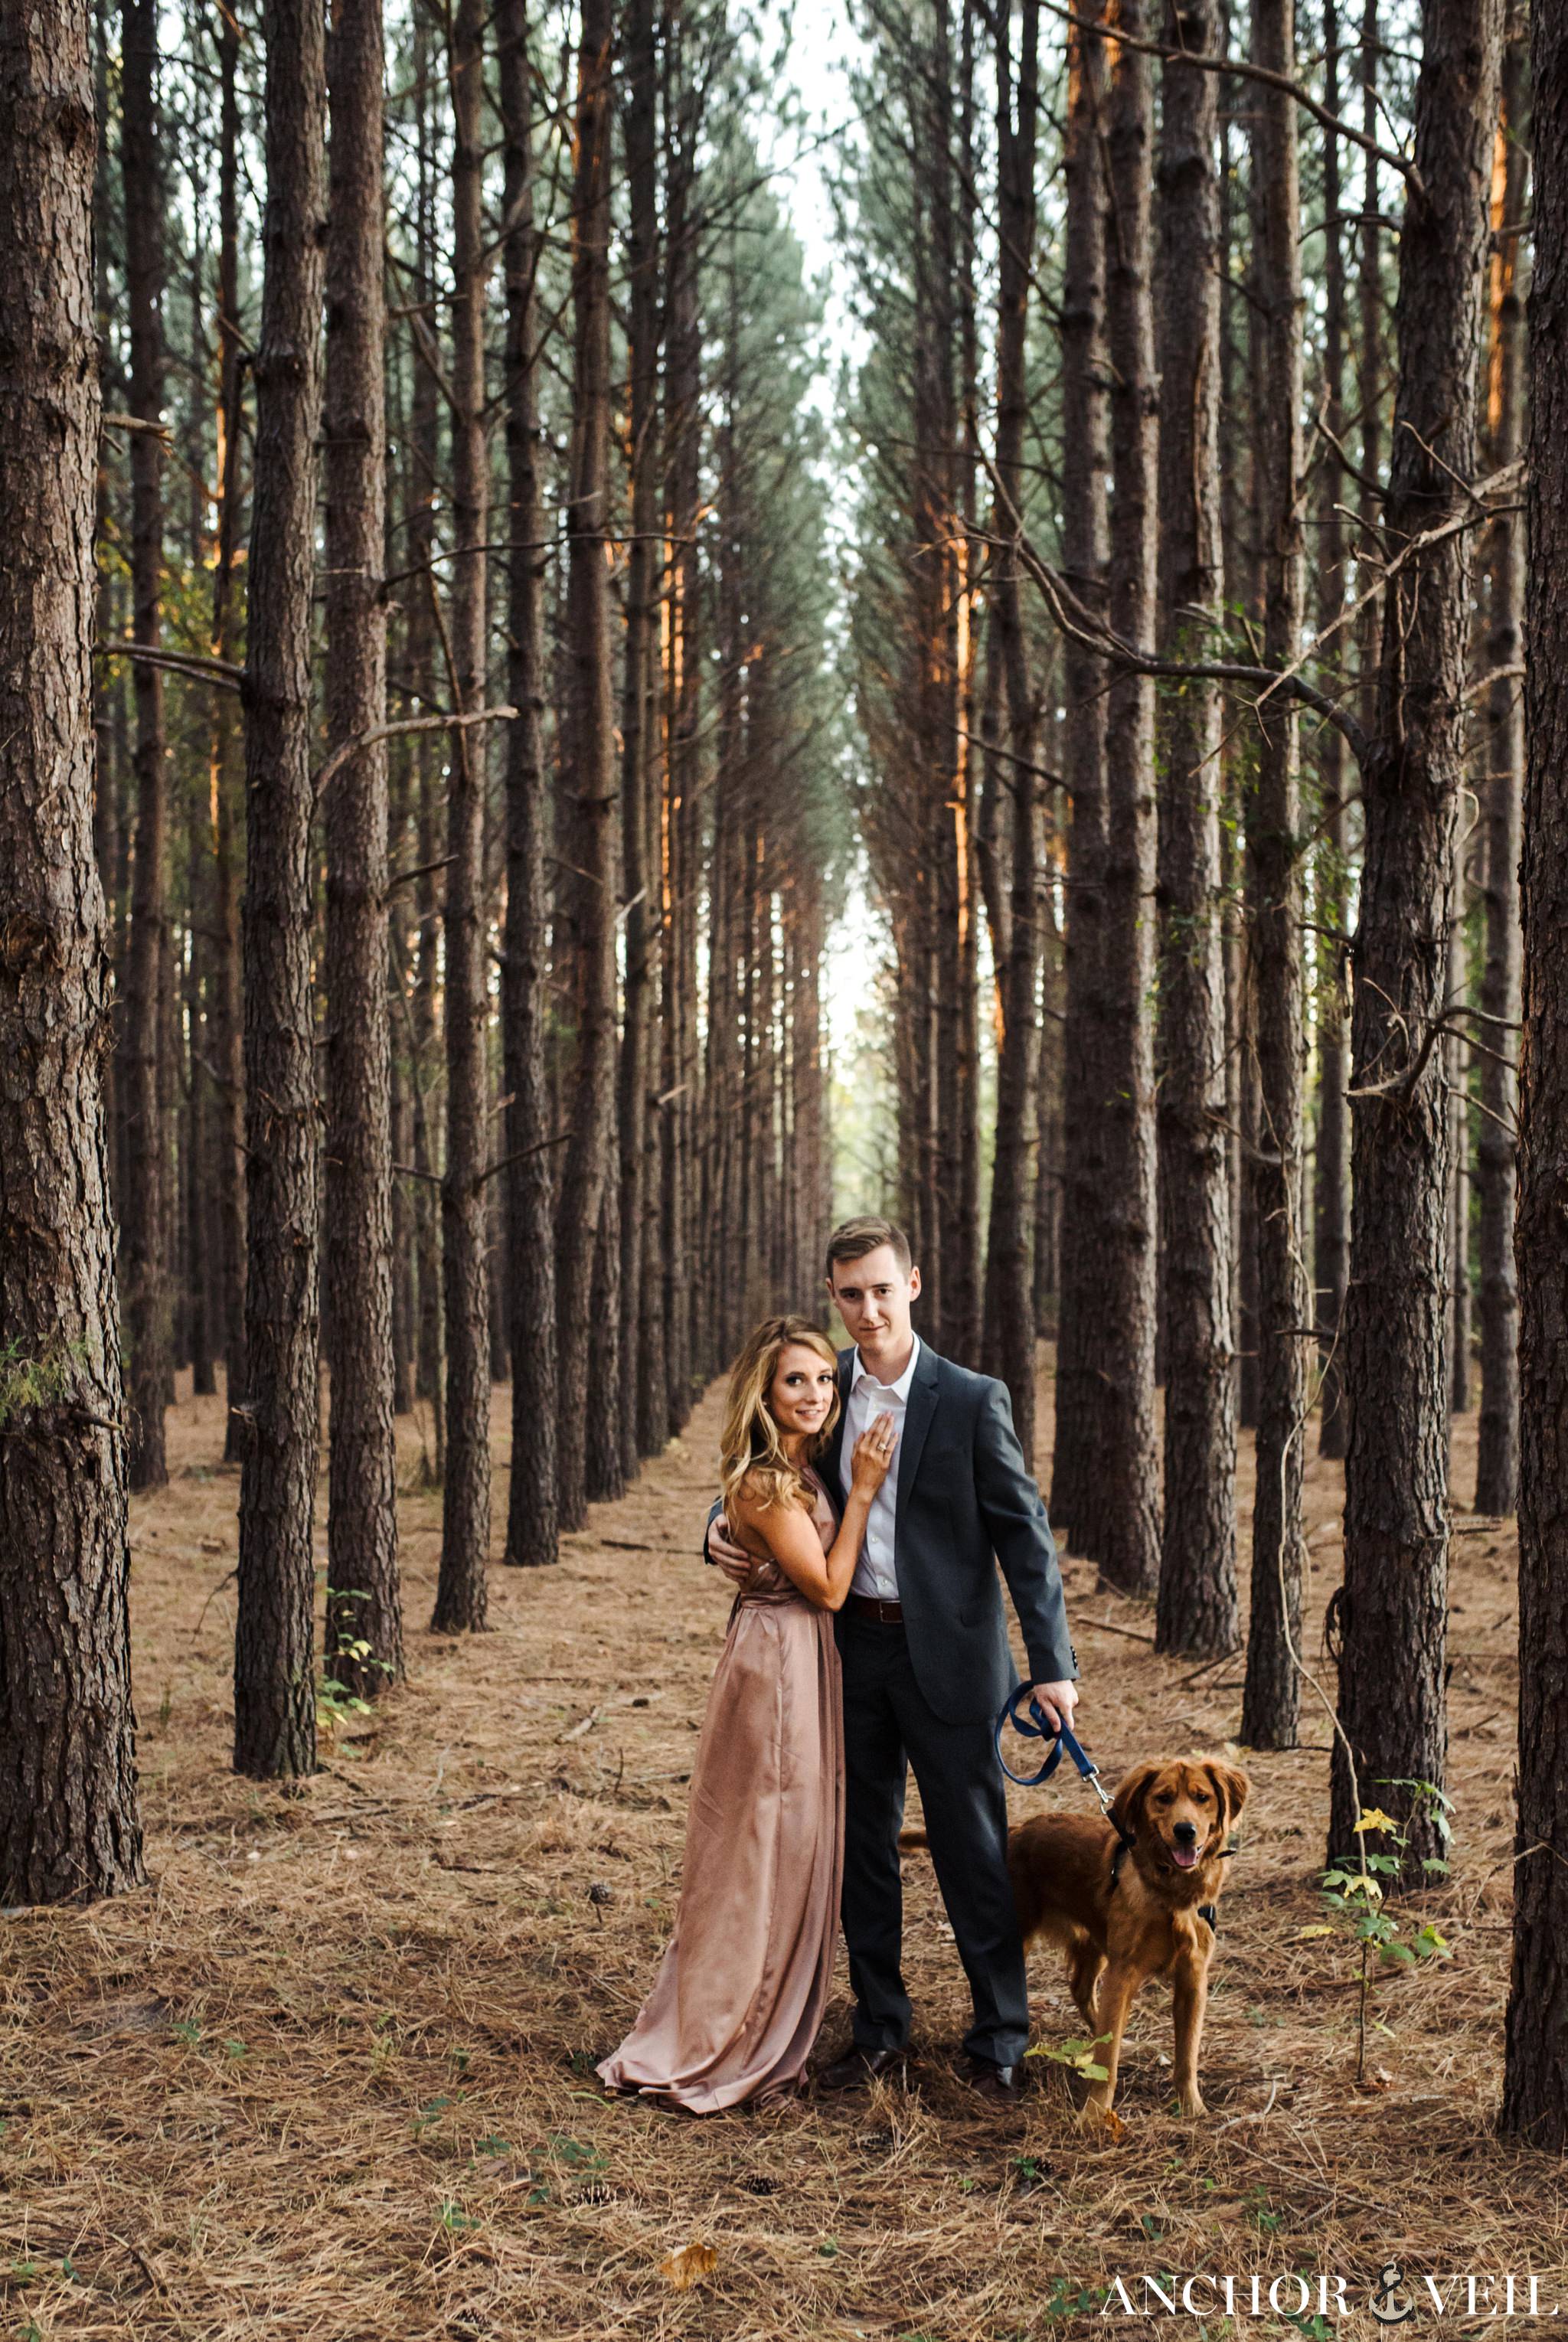 holding the dog for the picture in the tree forest during their charlotte engagement session